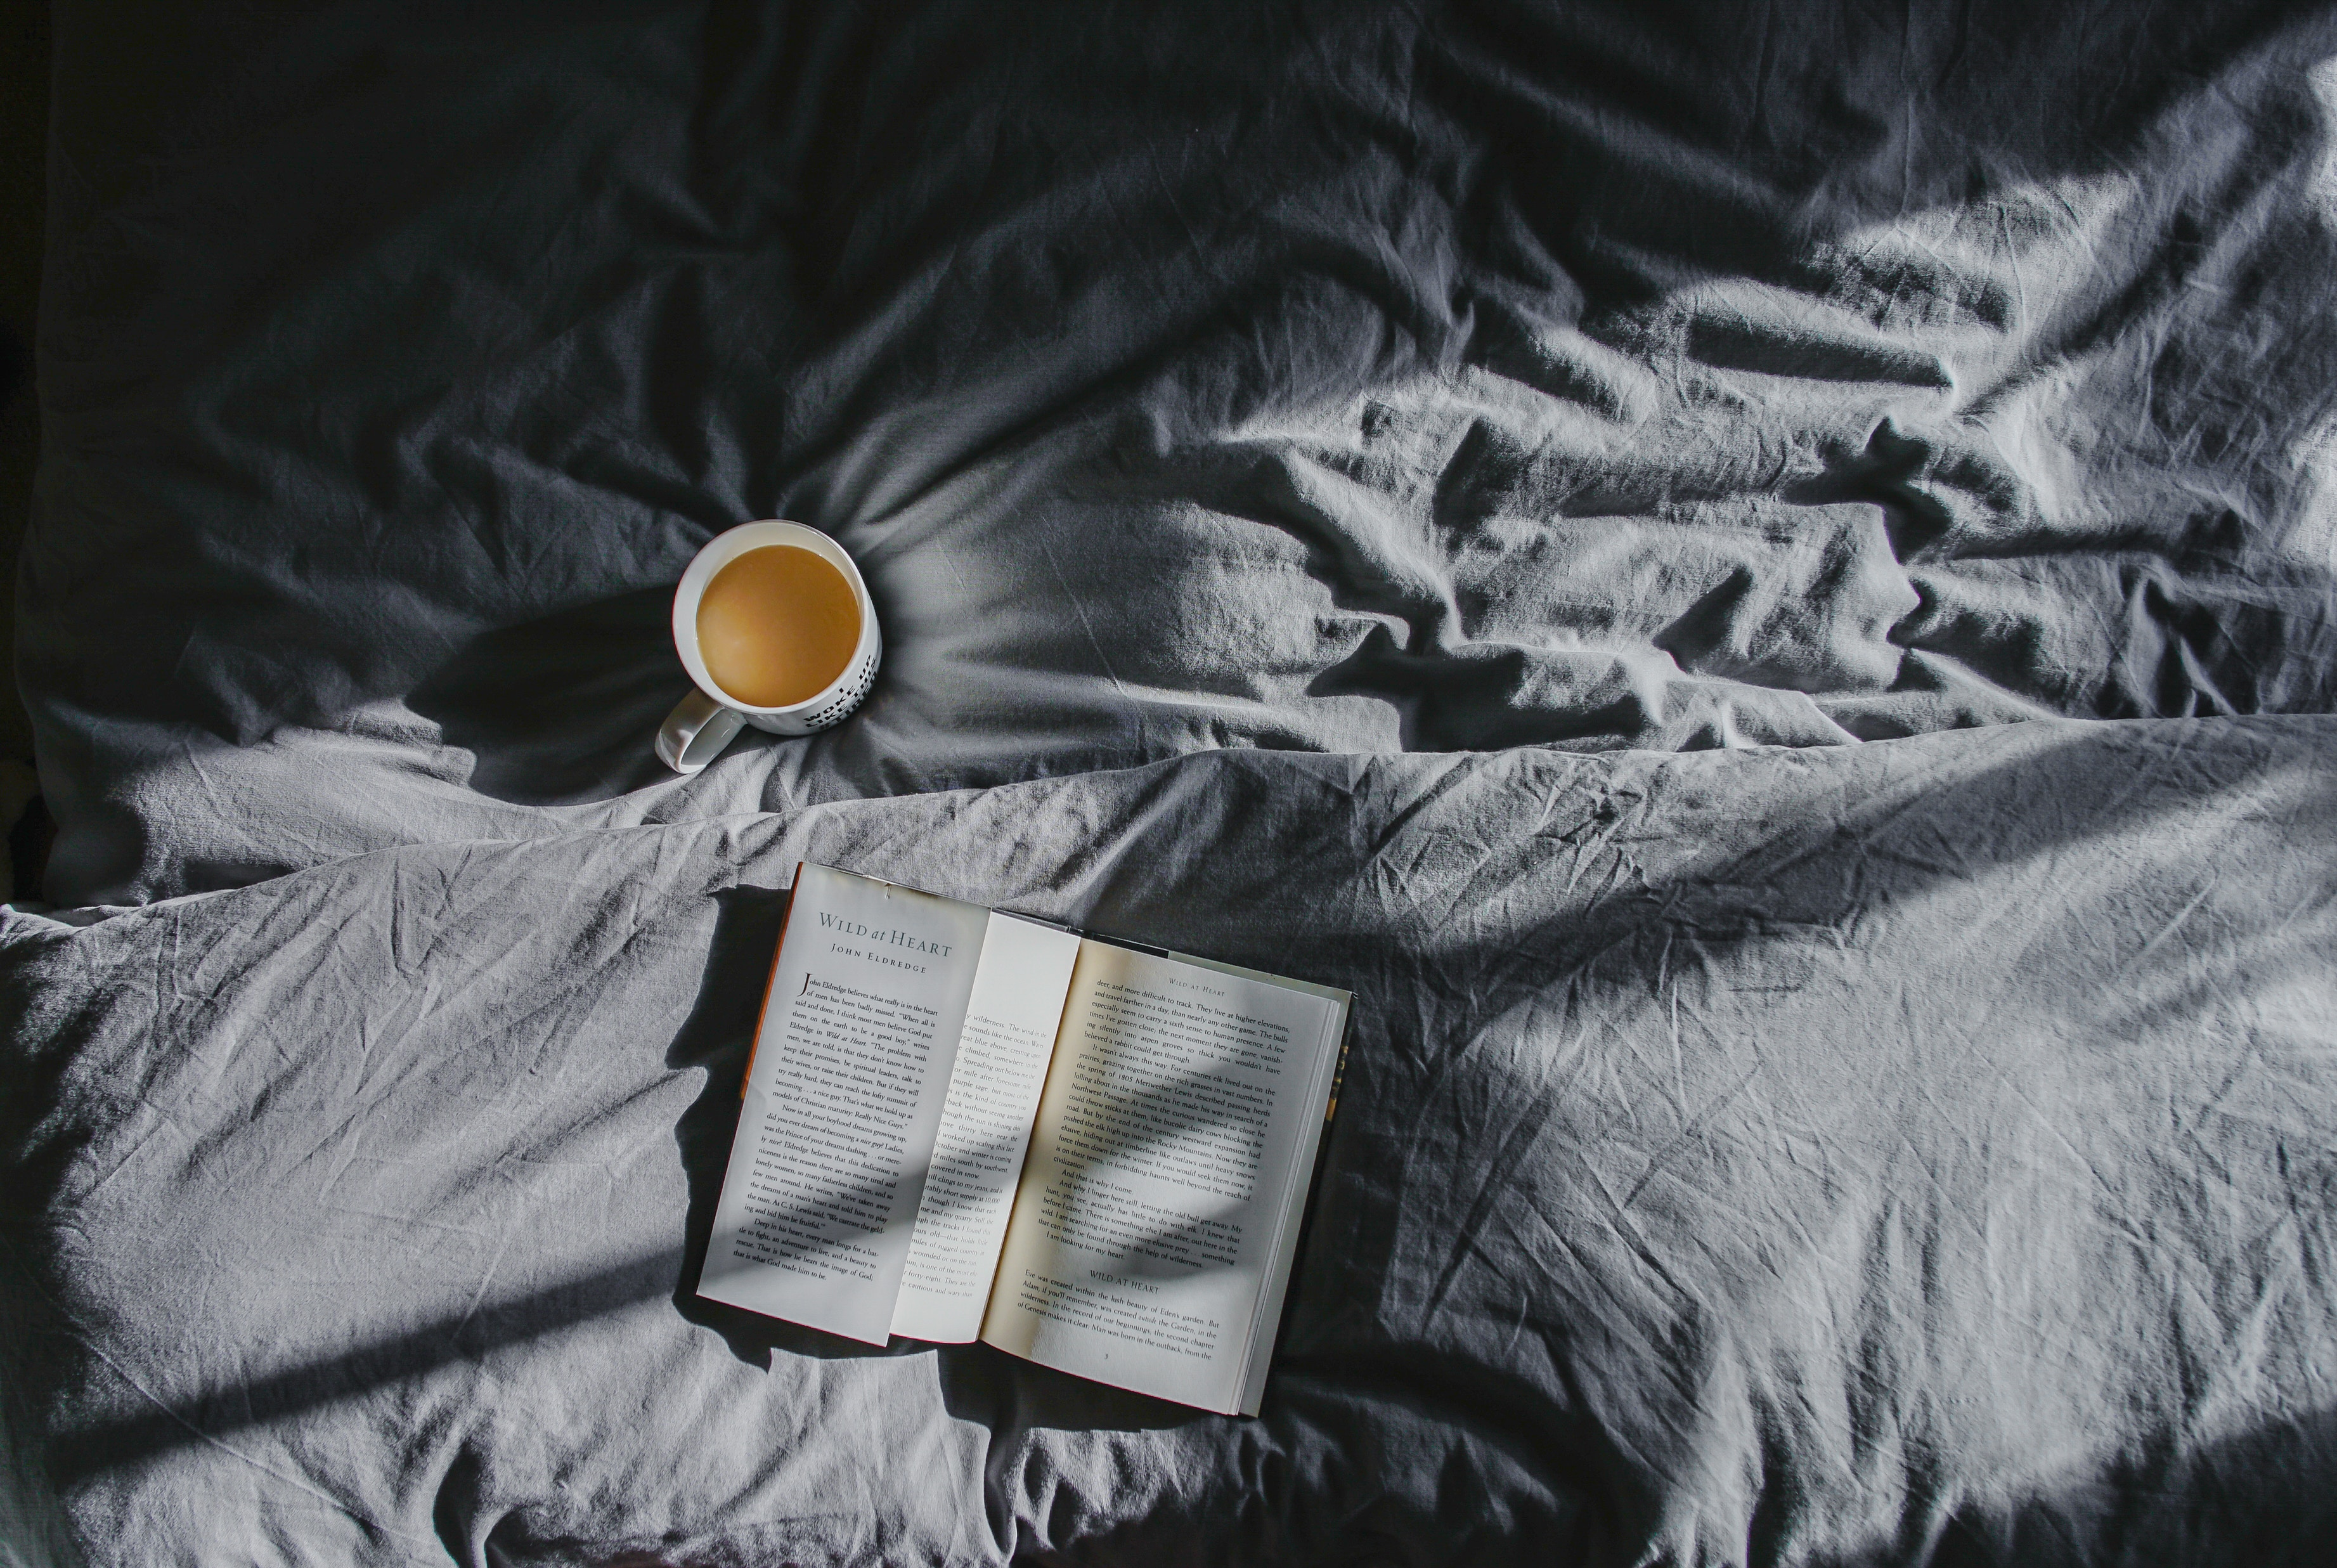 Free Images miscellaneous, miscellanea, bed, shadow Coffee